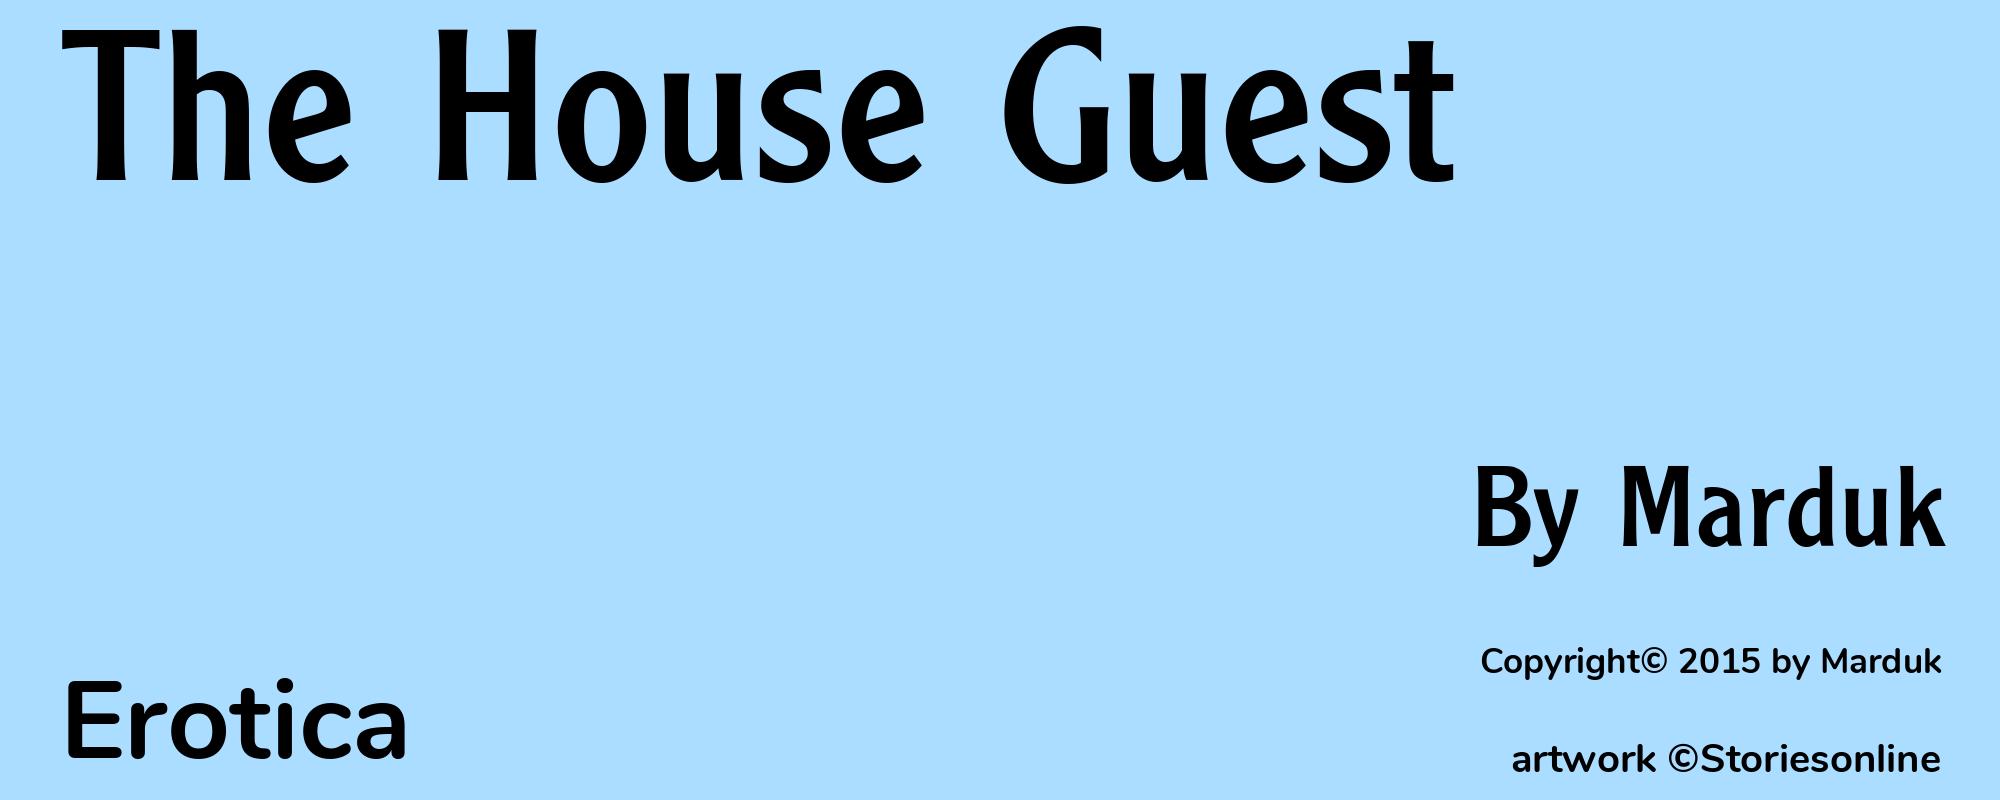 The House Guest - Cover